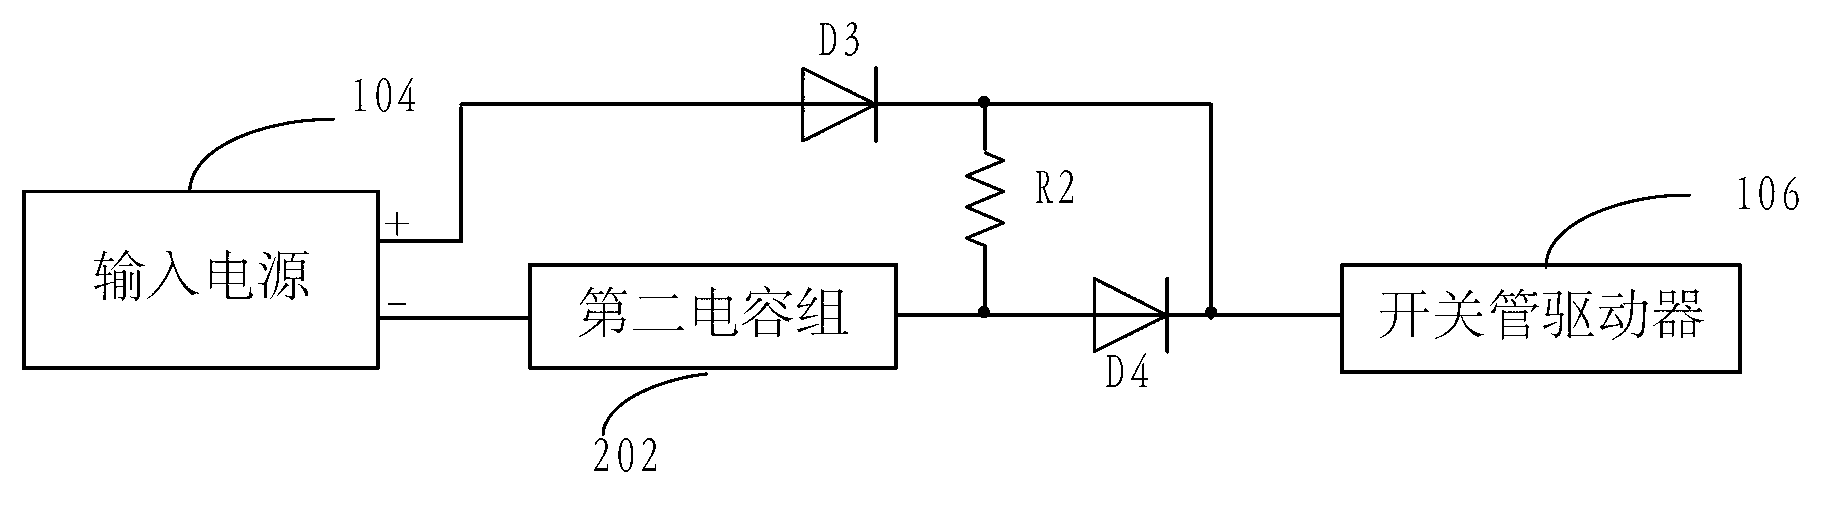 Under-voltage protection device and system of converter control system